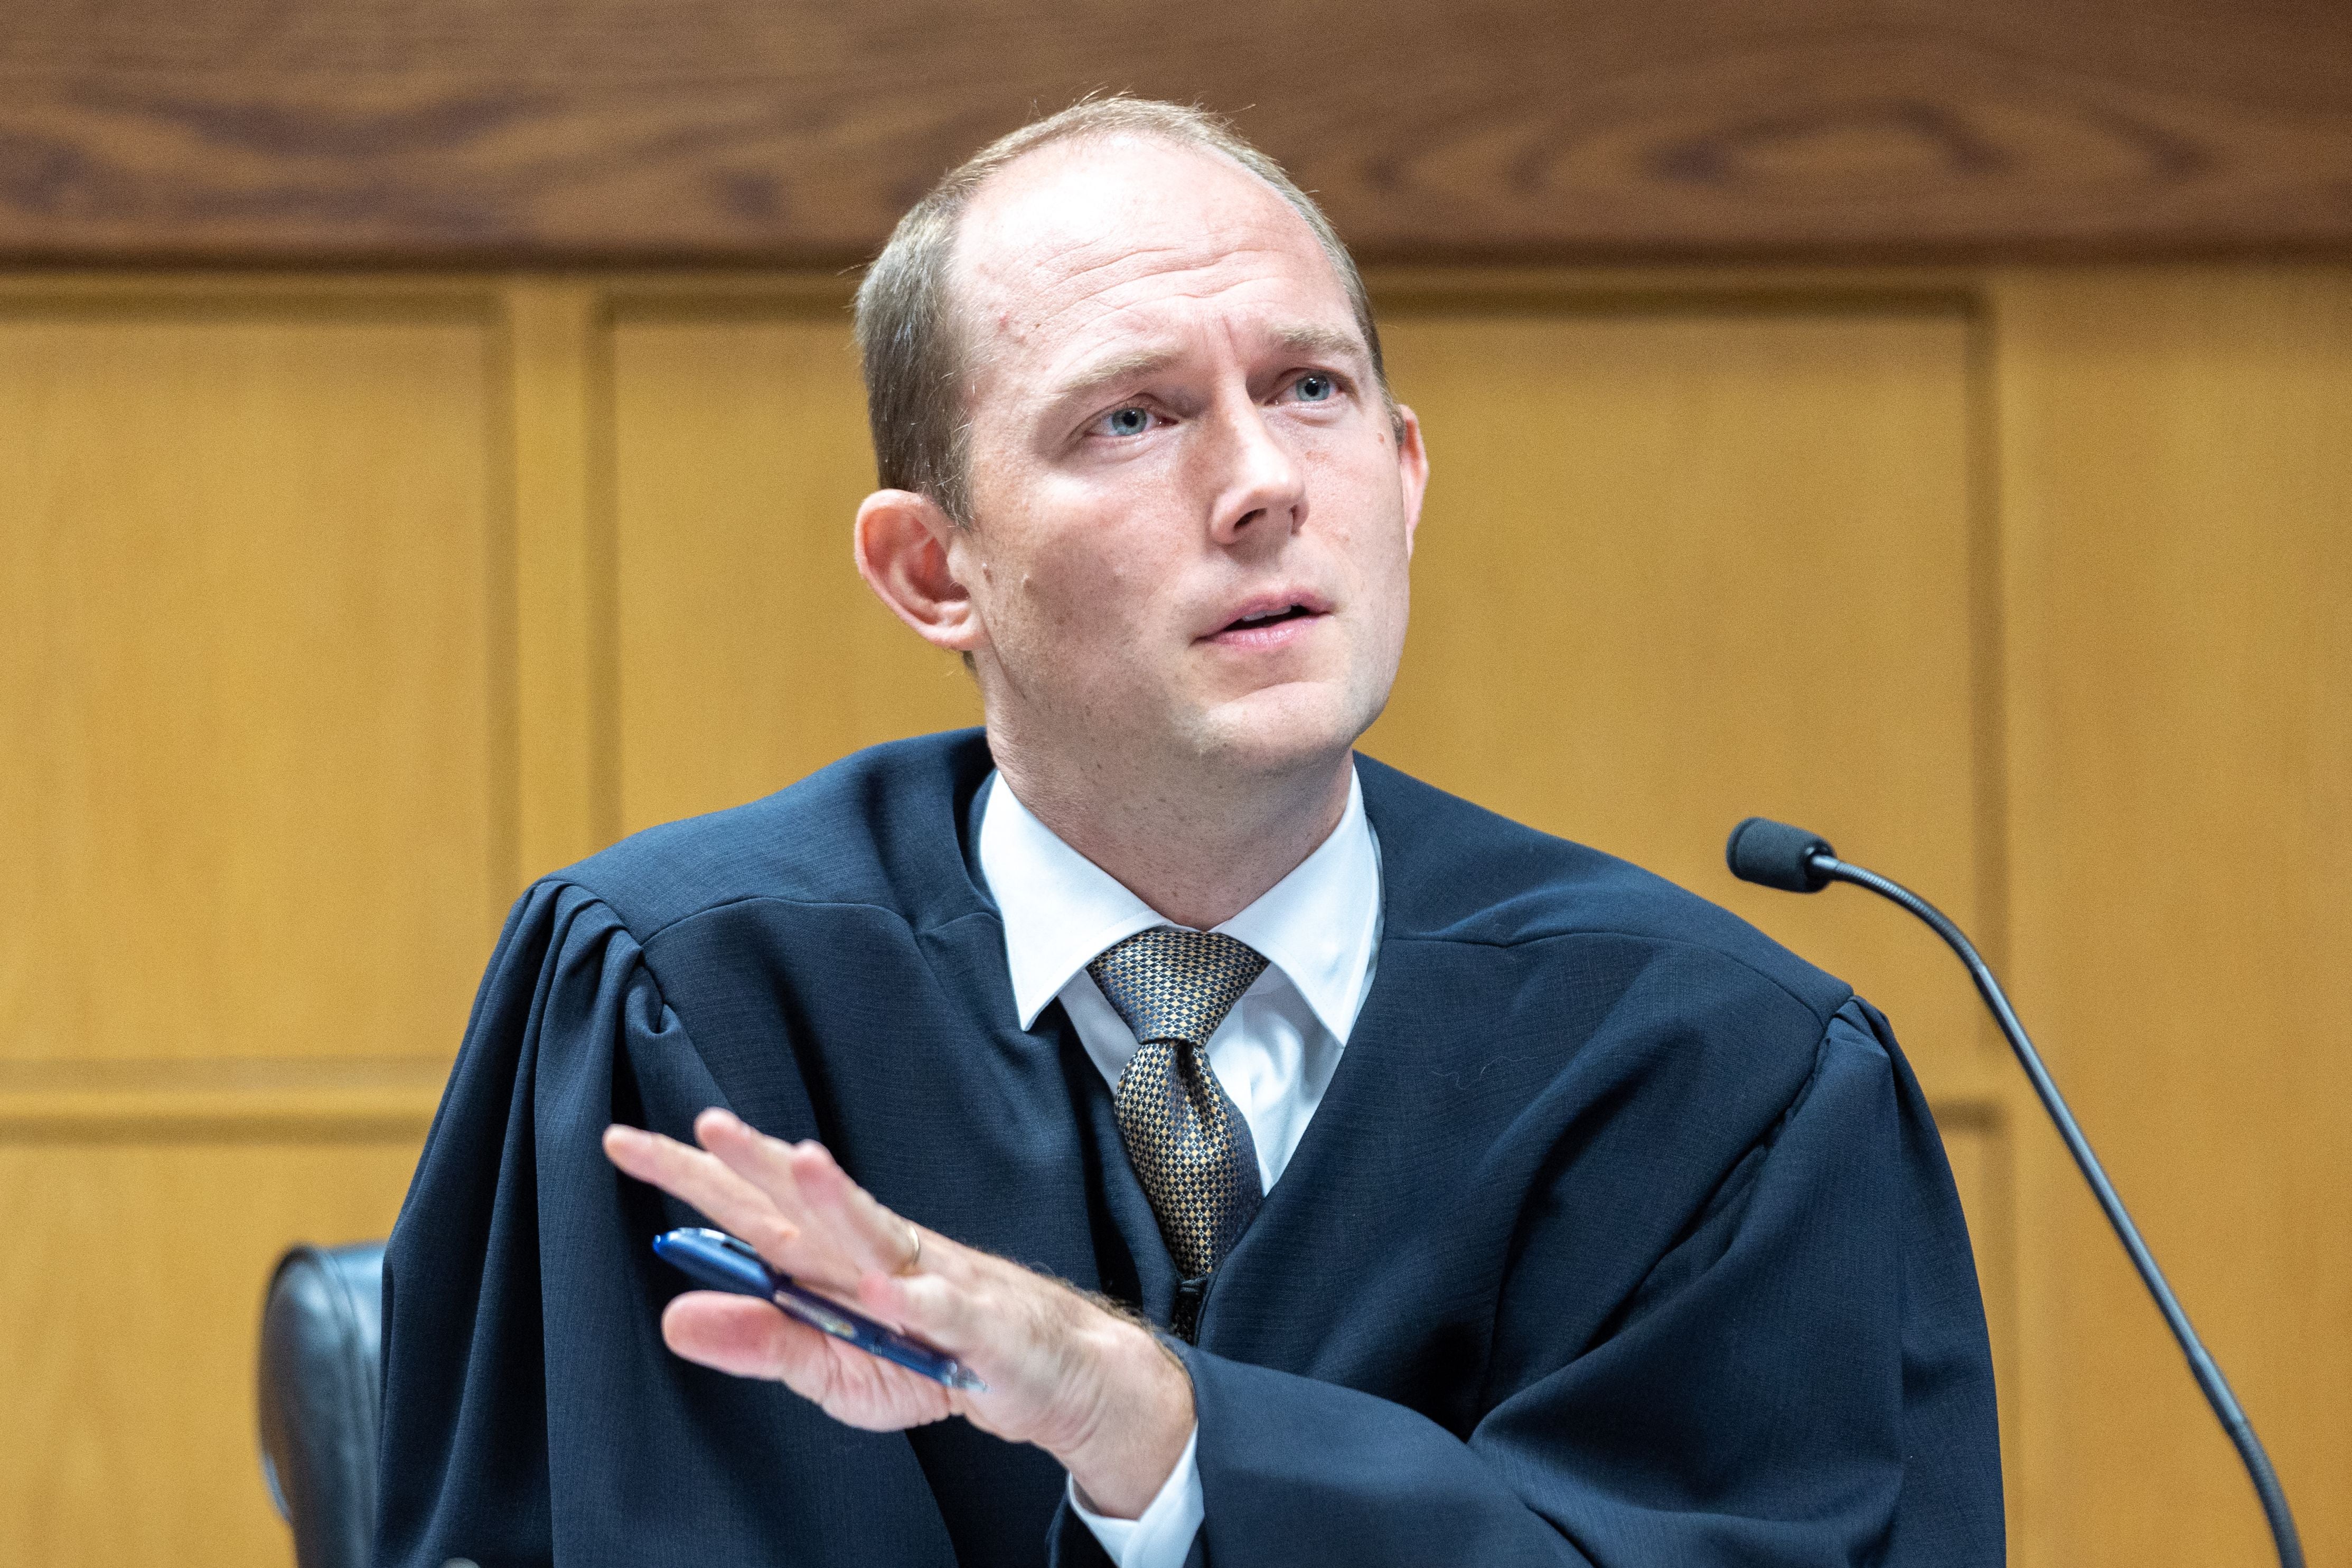 Judge Scott McAfee said he would allow live-streaming as well as still photographers and radio